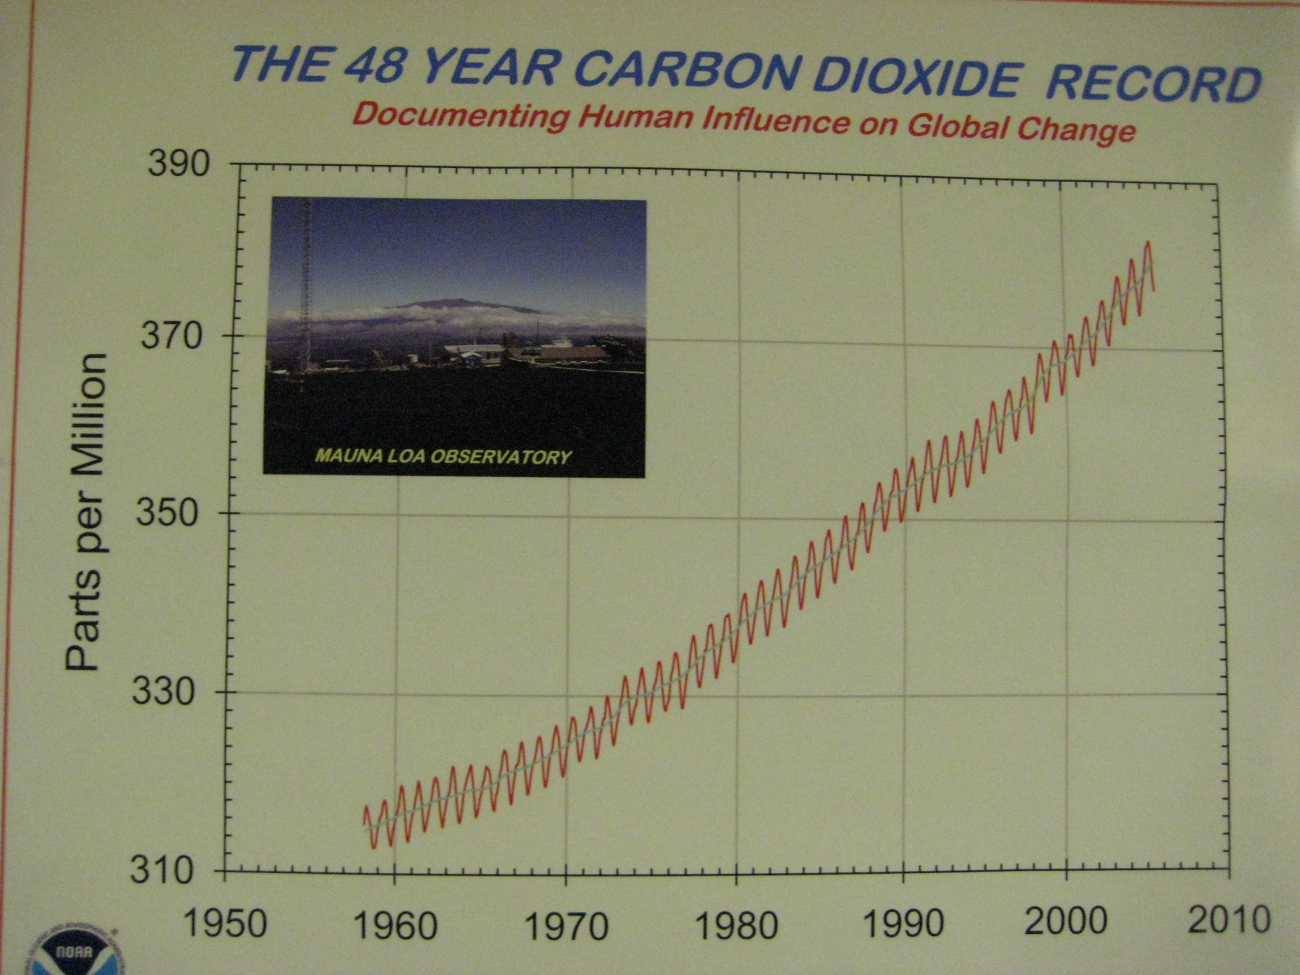 The carbon dioxide curve continues marching in an upward direction as shownby the observations of the Mauna Loa Observatory